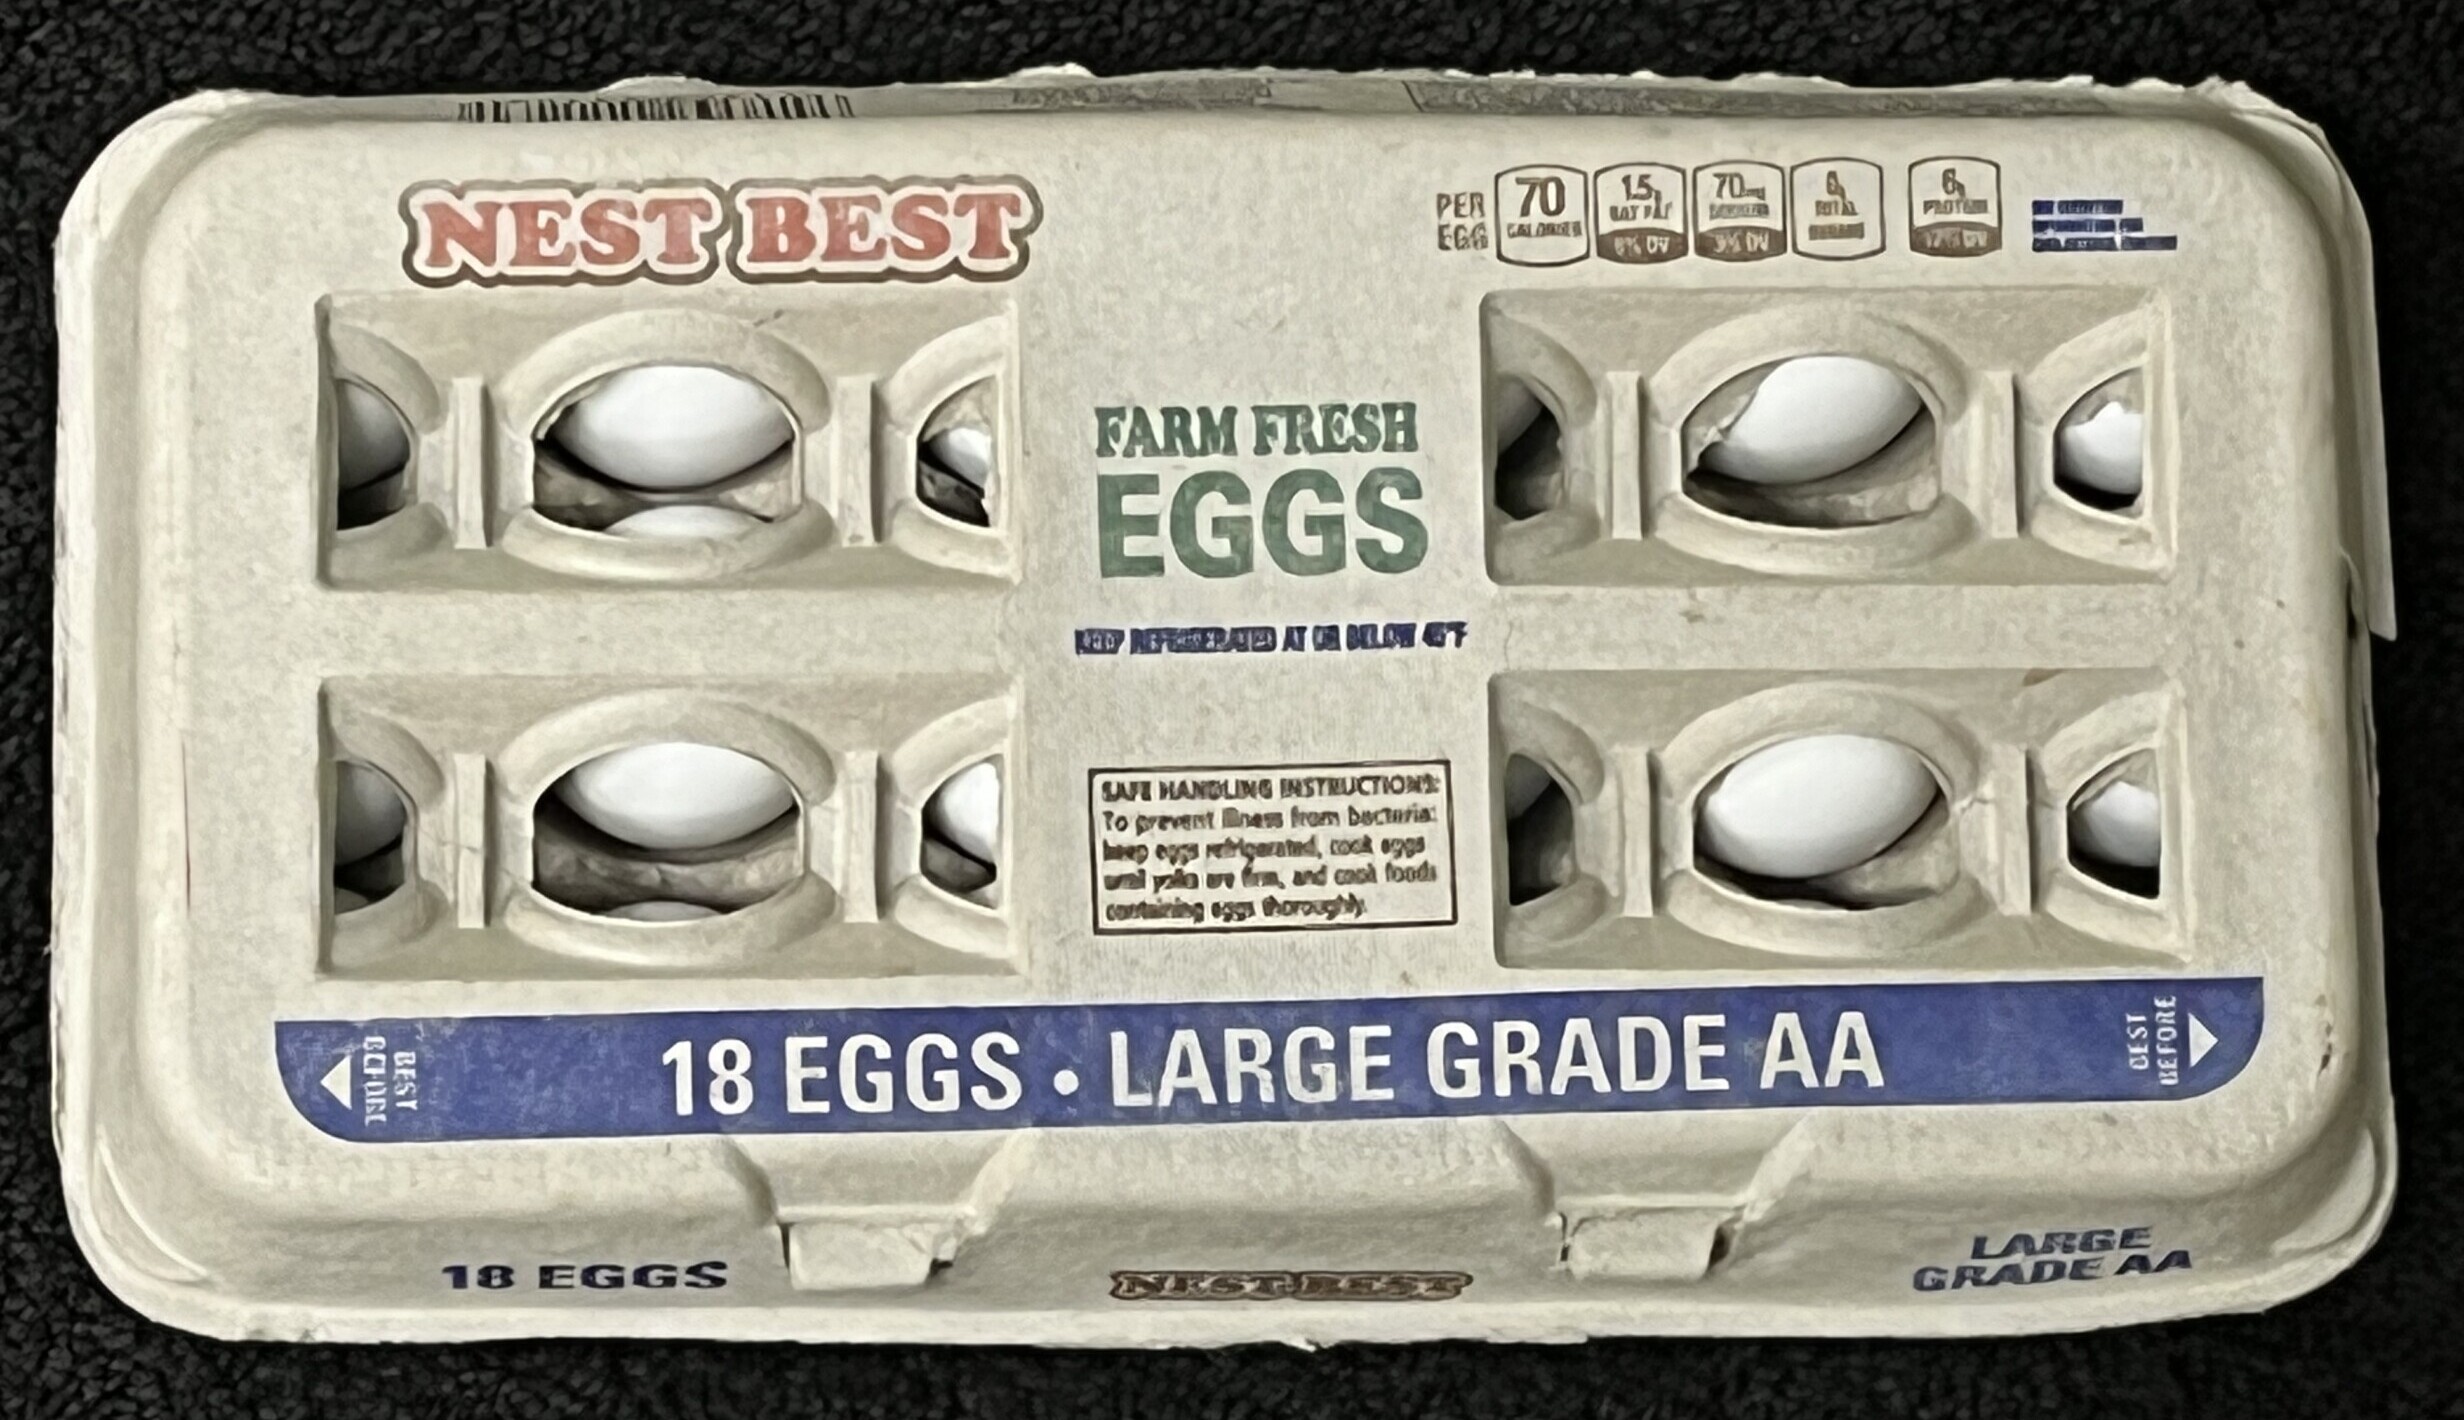 Nest Best Eggs produced by Valley Fresh Foods